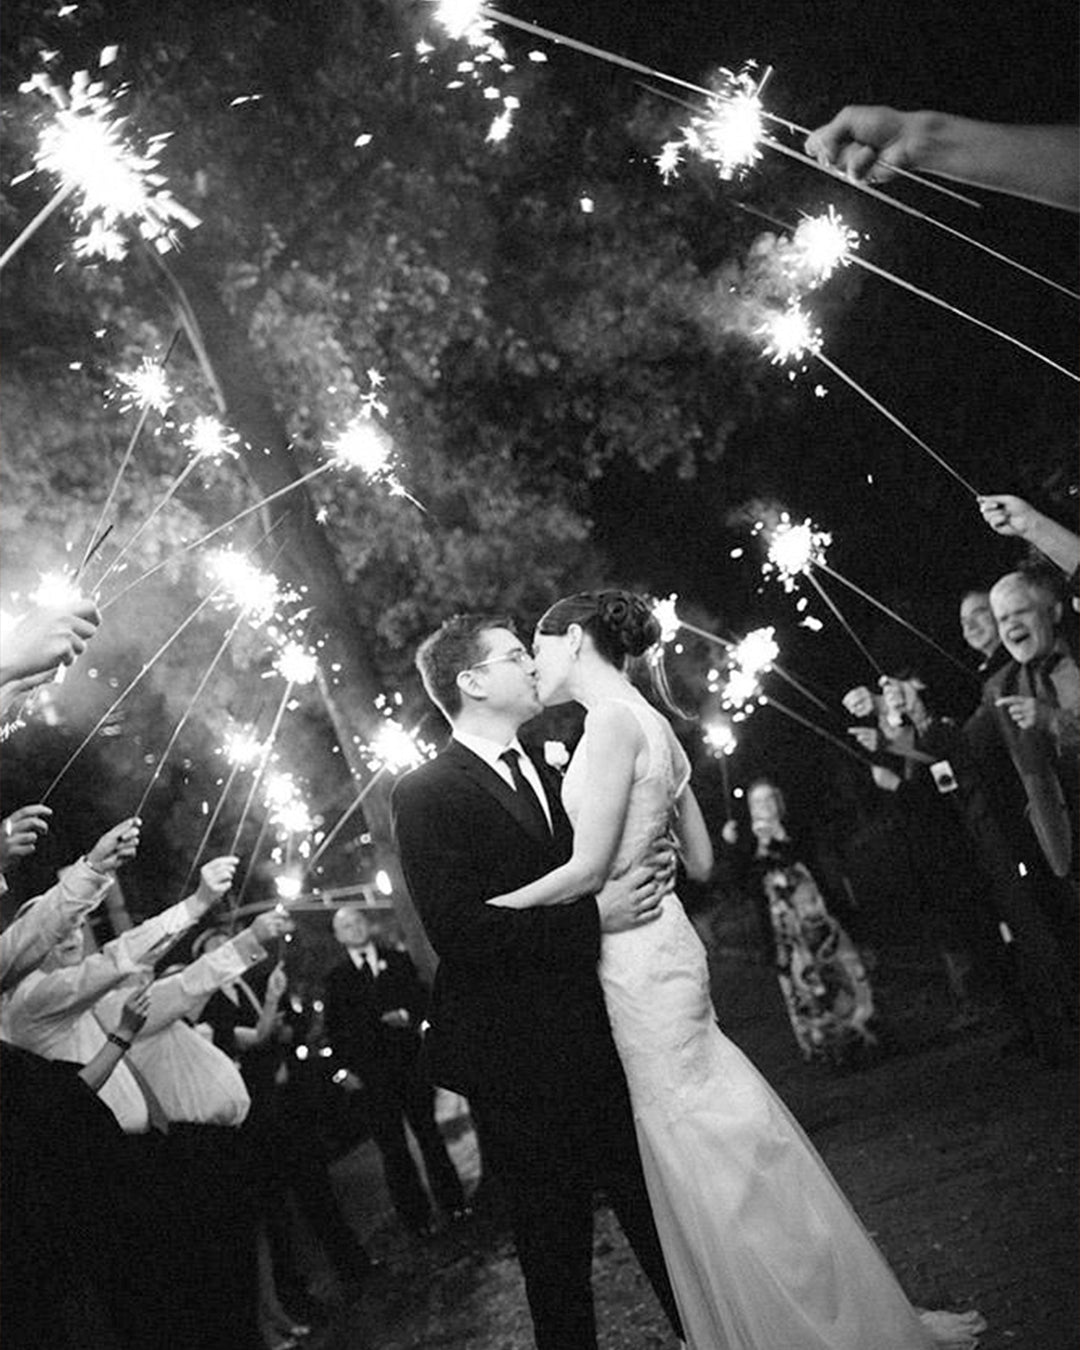 Wedding planning with sparklers